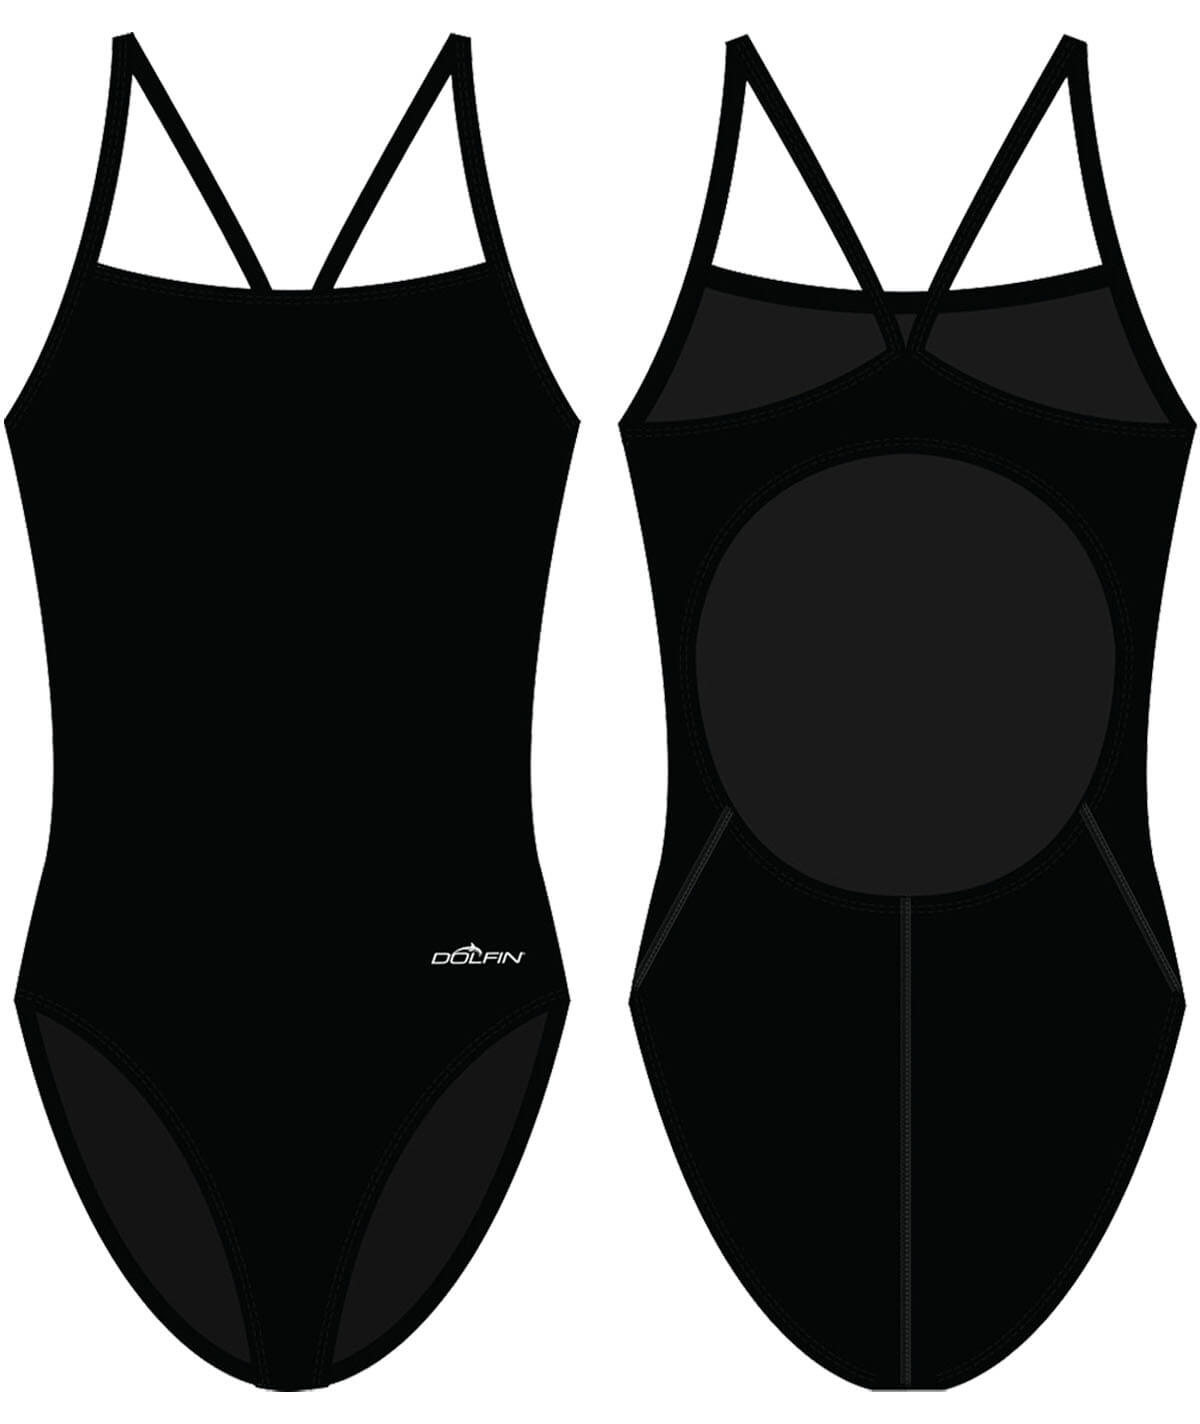 Fit Kit - Female Reliance Print V-Back One Piece Swimsuit